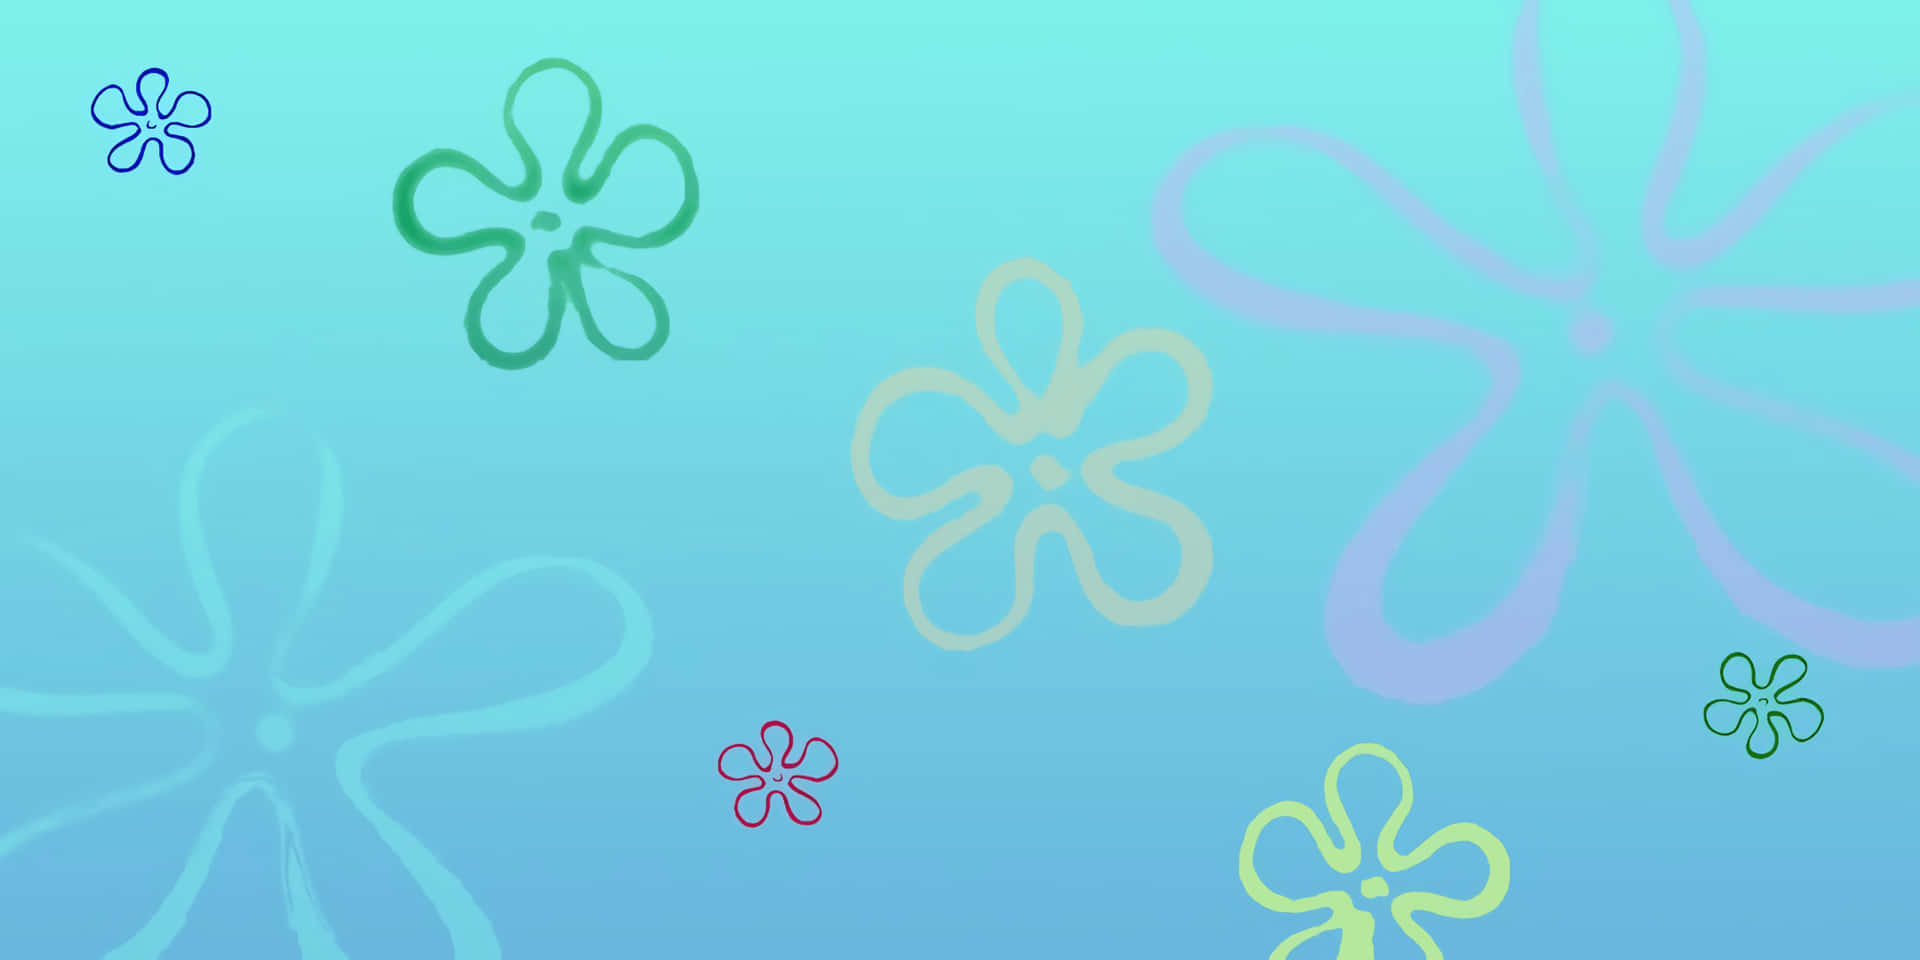 get a bubbly vibe with this cheerful Spongebob Aesthetic Desktop and add color to your workspace Wallpaper